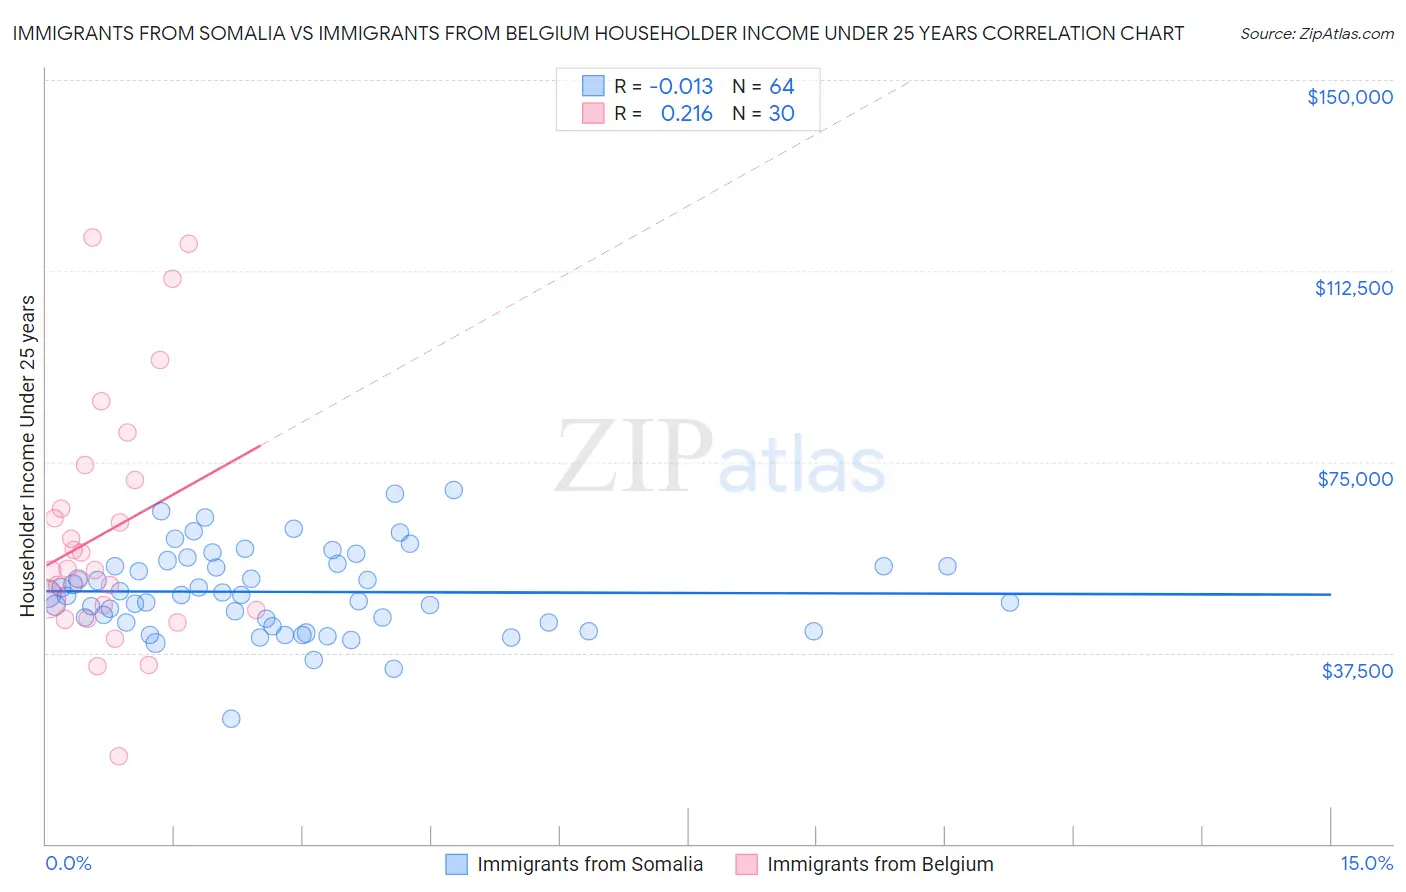 Immigrants from Somalia vs Immigrants from Belgium Householder Income Under 25 years